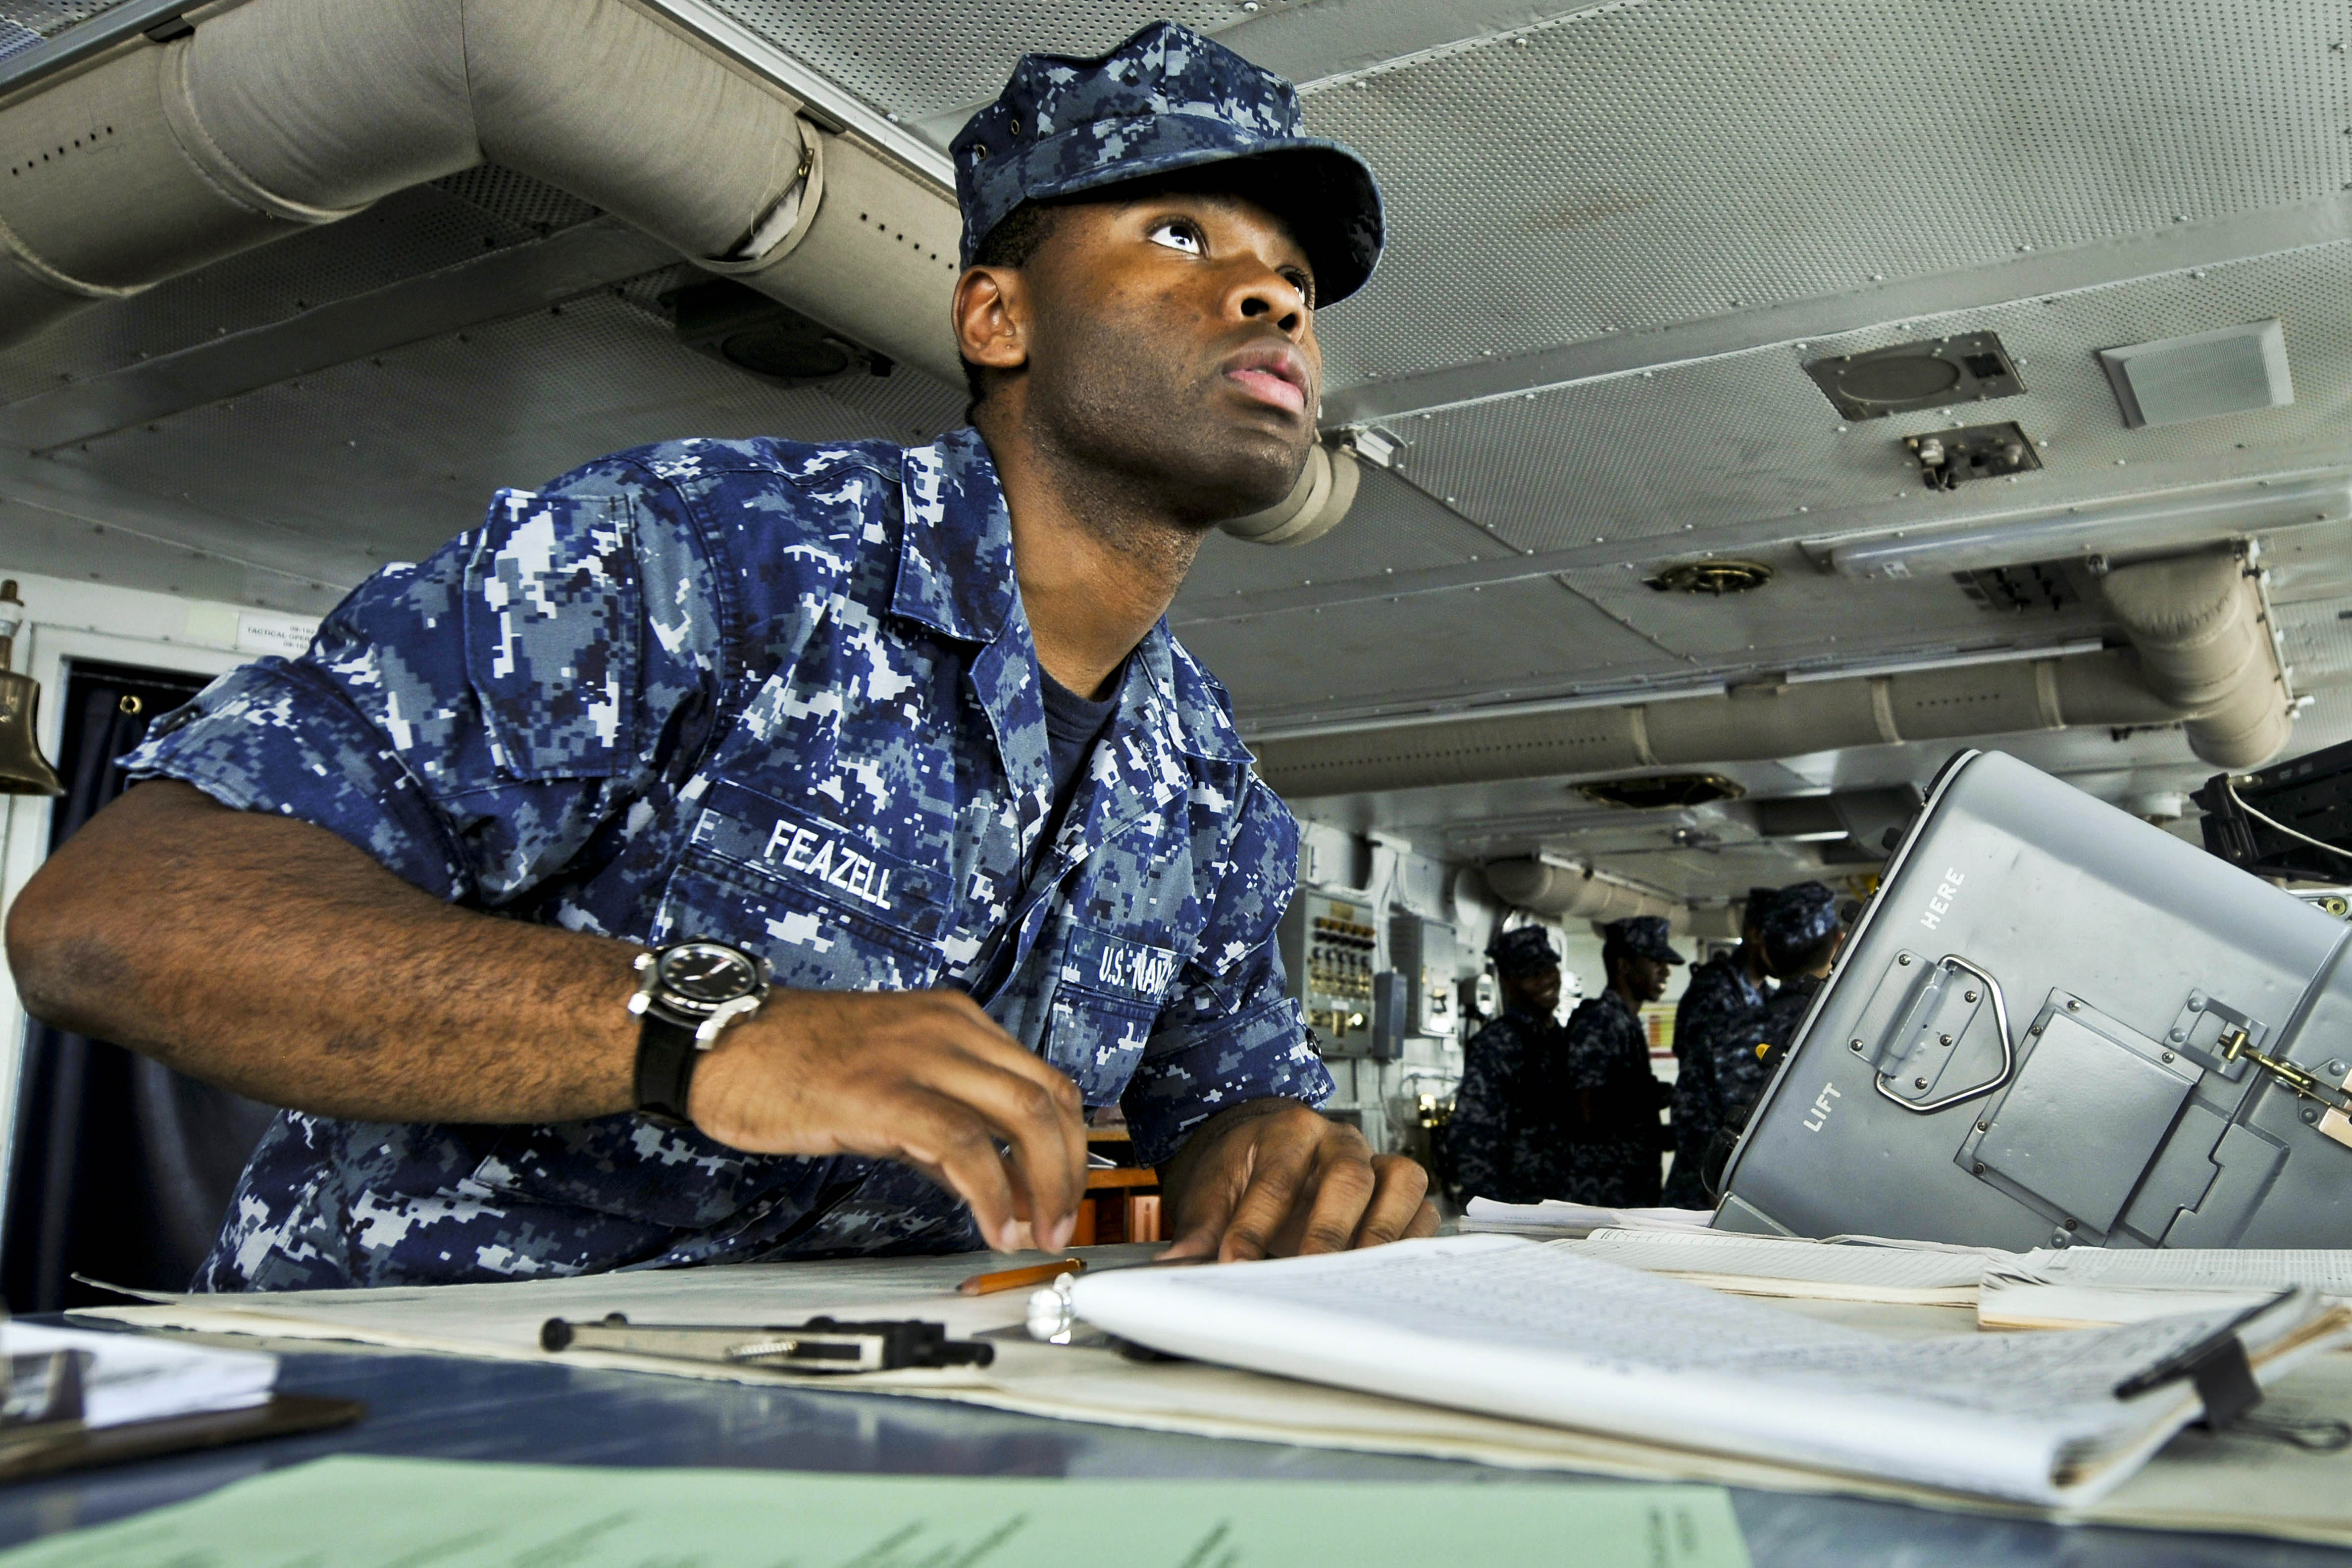 Defense.gov News Photo 120115-N-JN612-022 - U.S. Navy Seaman Roosevelt Feazell charts a course from the bridge of the aircraft carrier USS Abraham Lincoln in the U.S. 7th Fleet area of